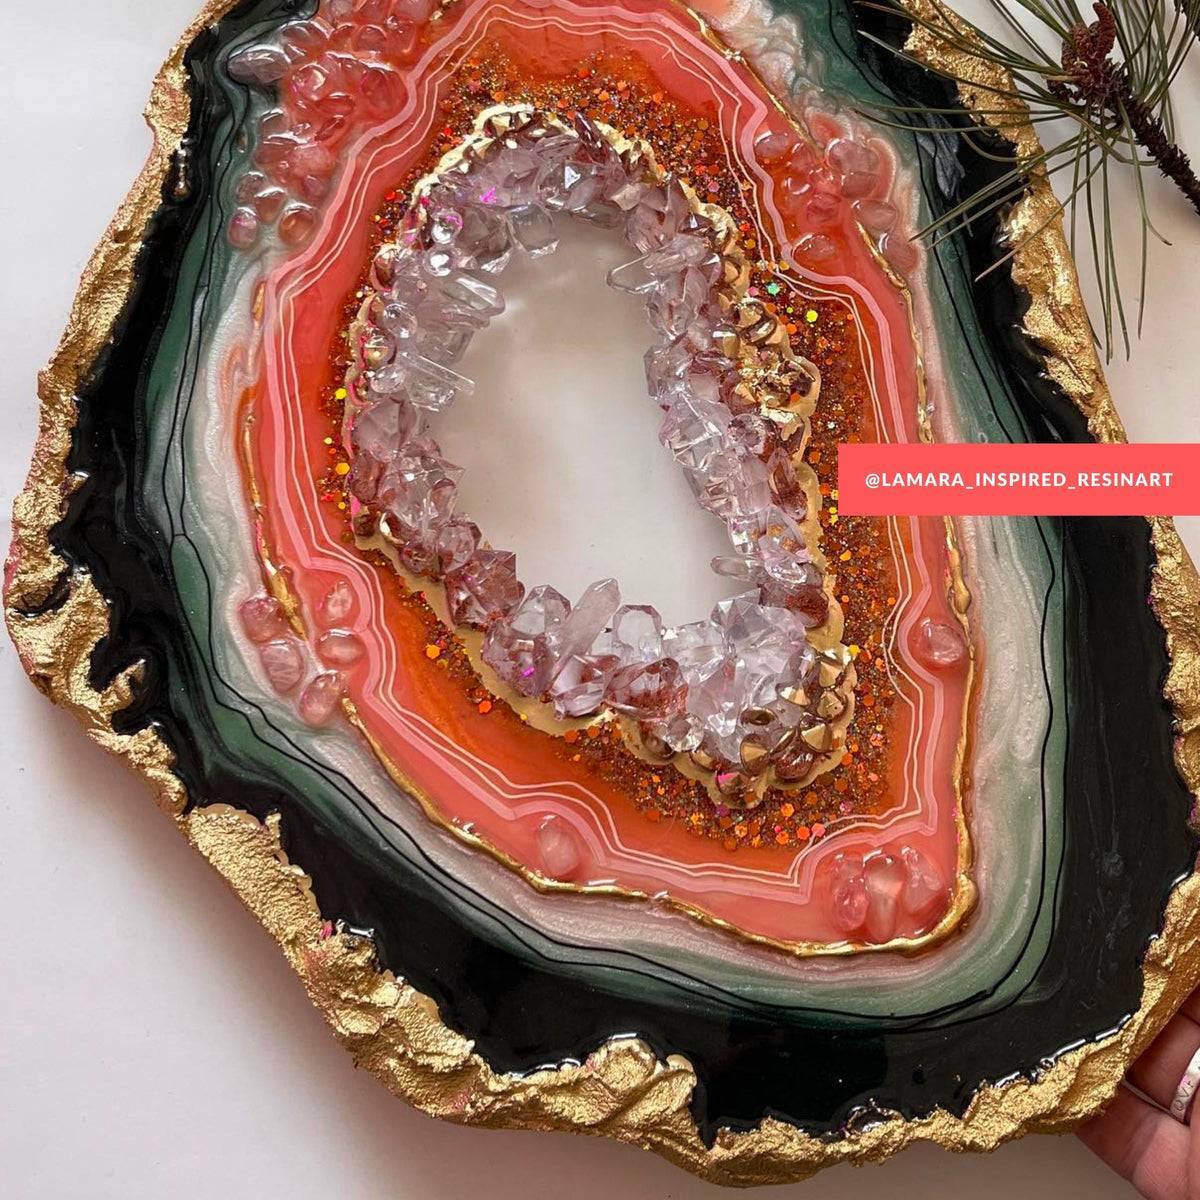 Resin Art - The Beginner's Guide to Creating Art with Resin